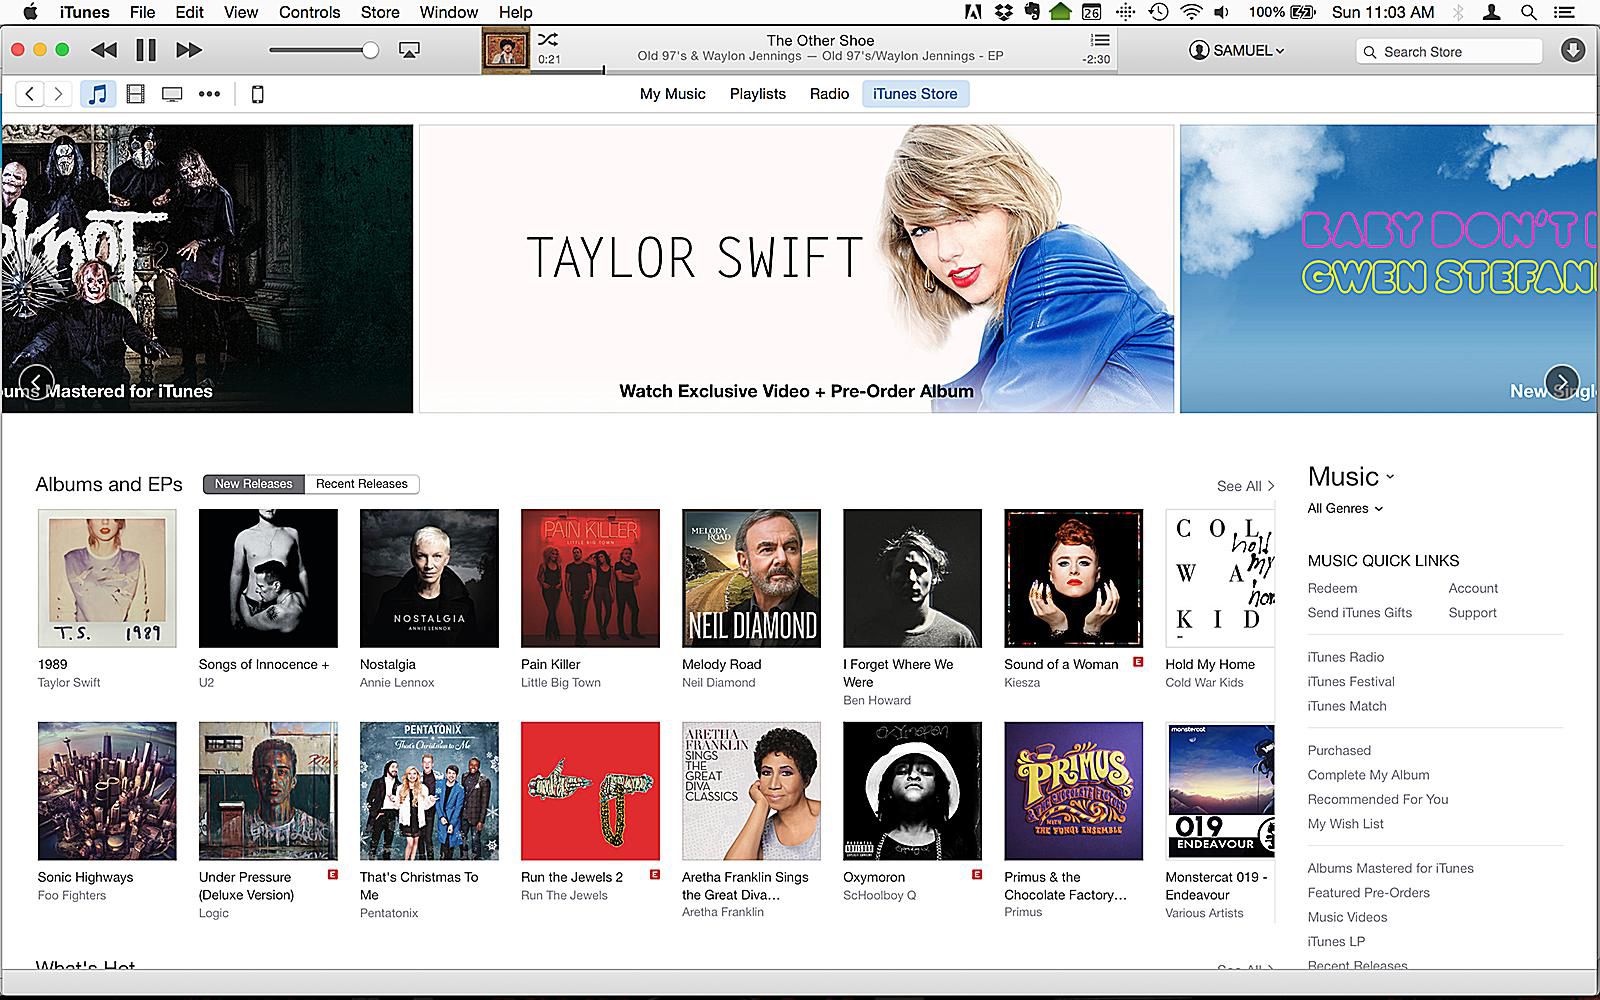 Buying Music From the iTunes Store
